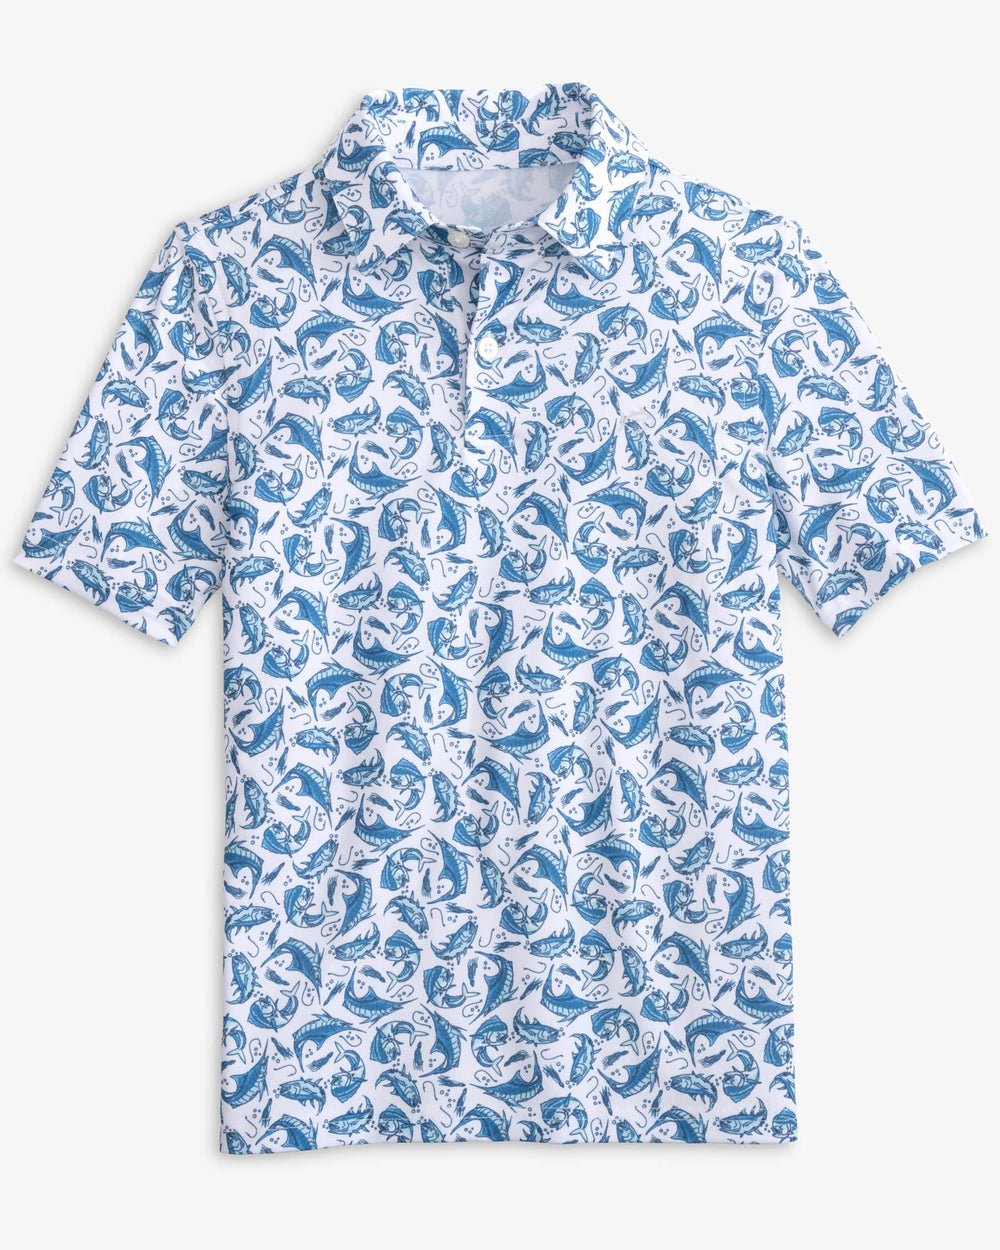 The front view of the Southern Tide Driver Catch You Later Performance Polo Shirt by Southern Tide - Cloud White